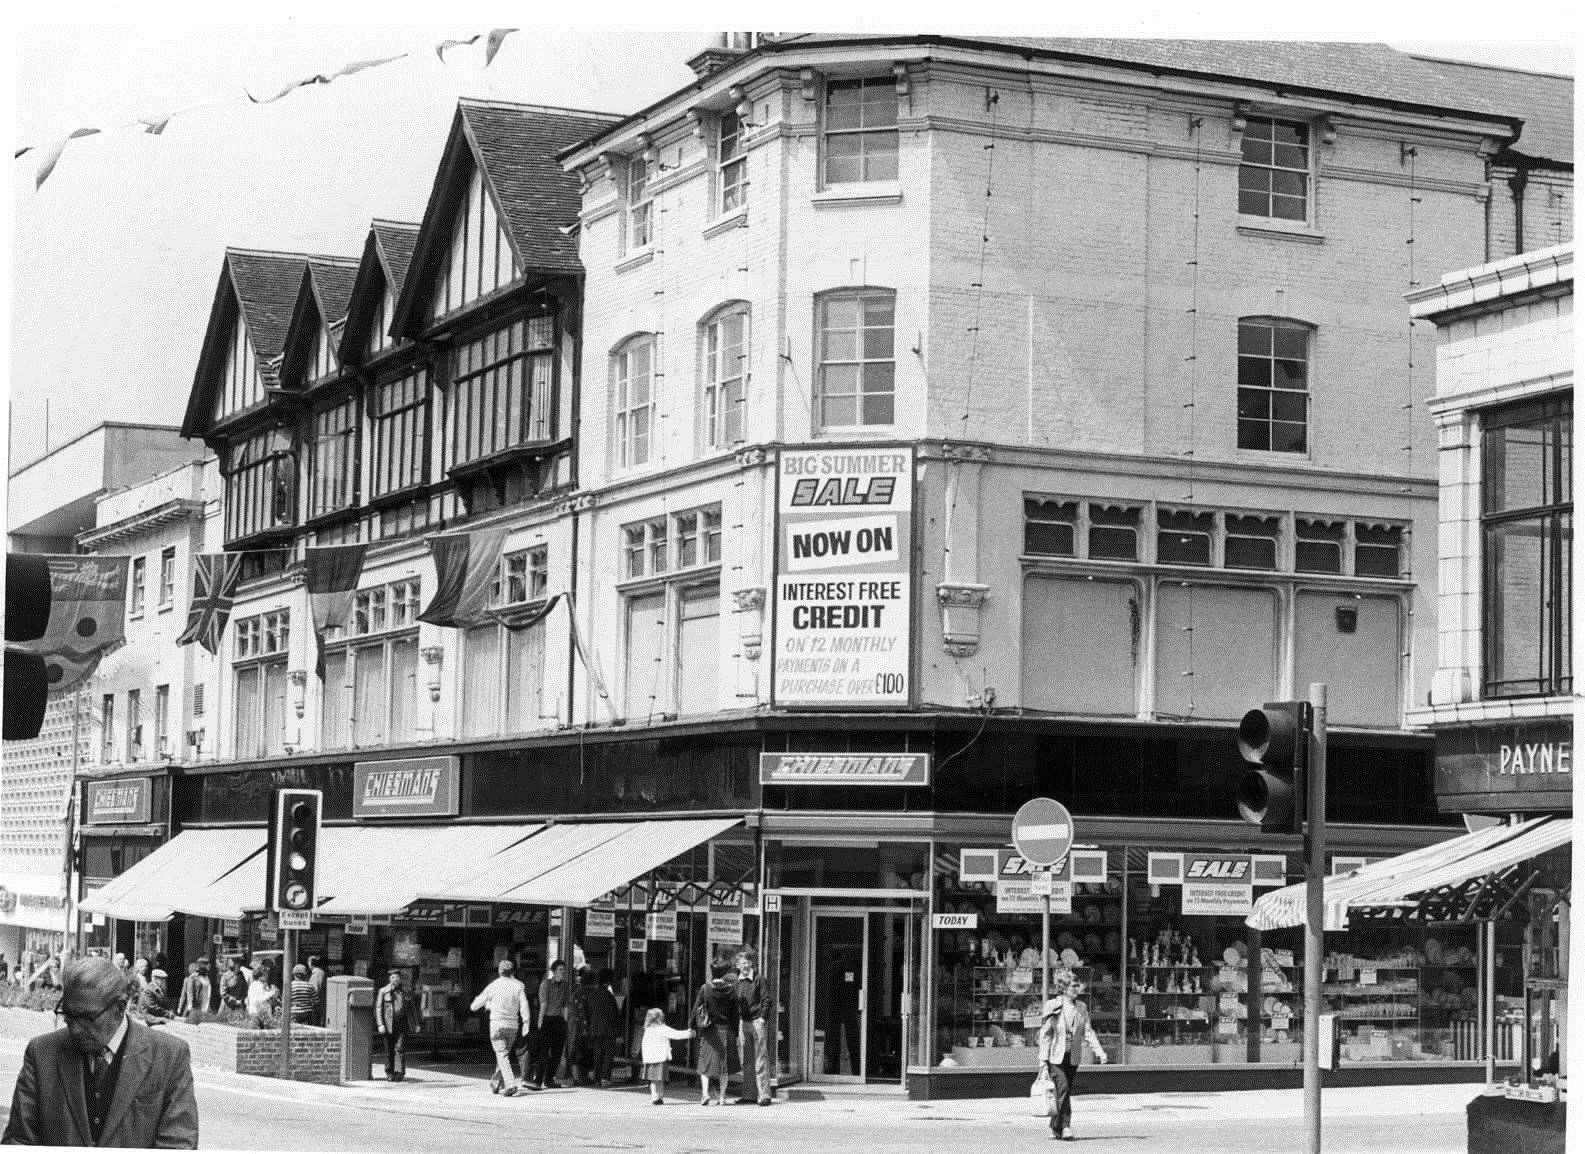 Chiesmans department store on the corner of Pudding Lane, Maidstone, in July 1980. The site is now occupied by The Herbalist gastropub